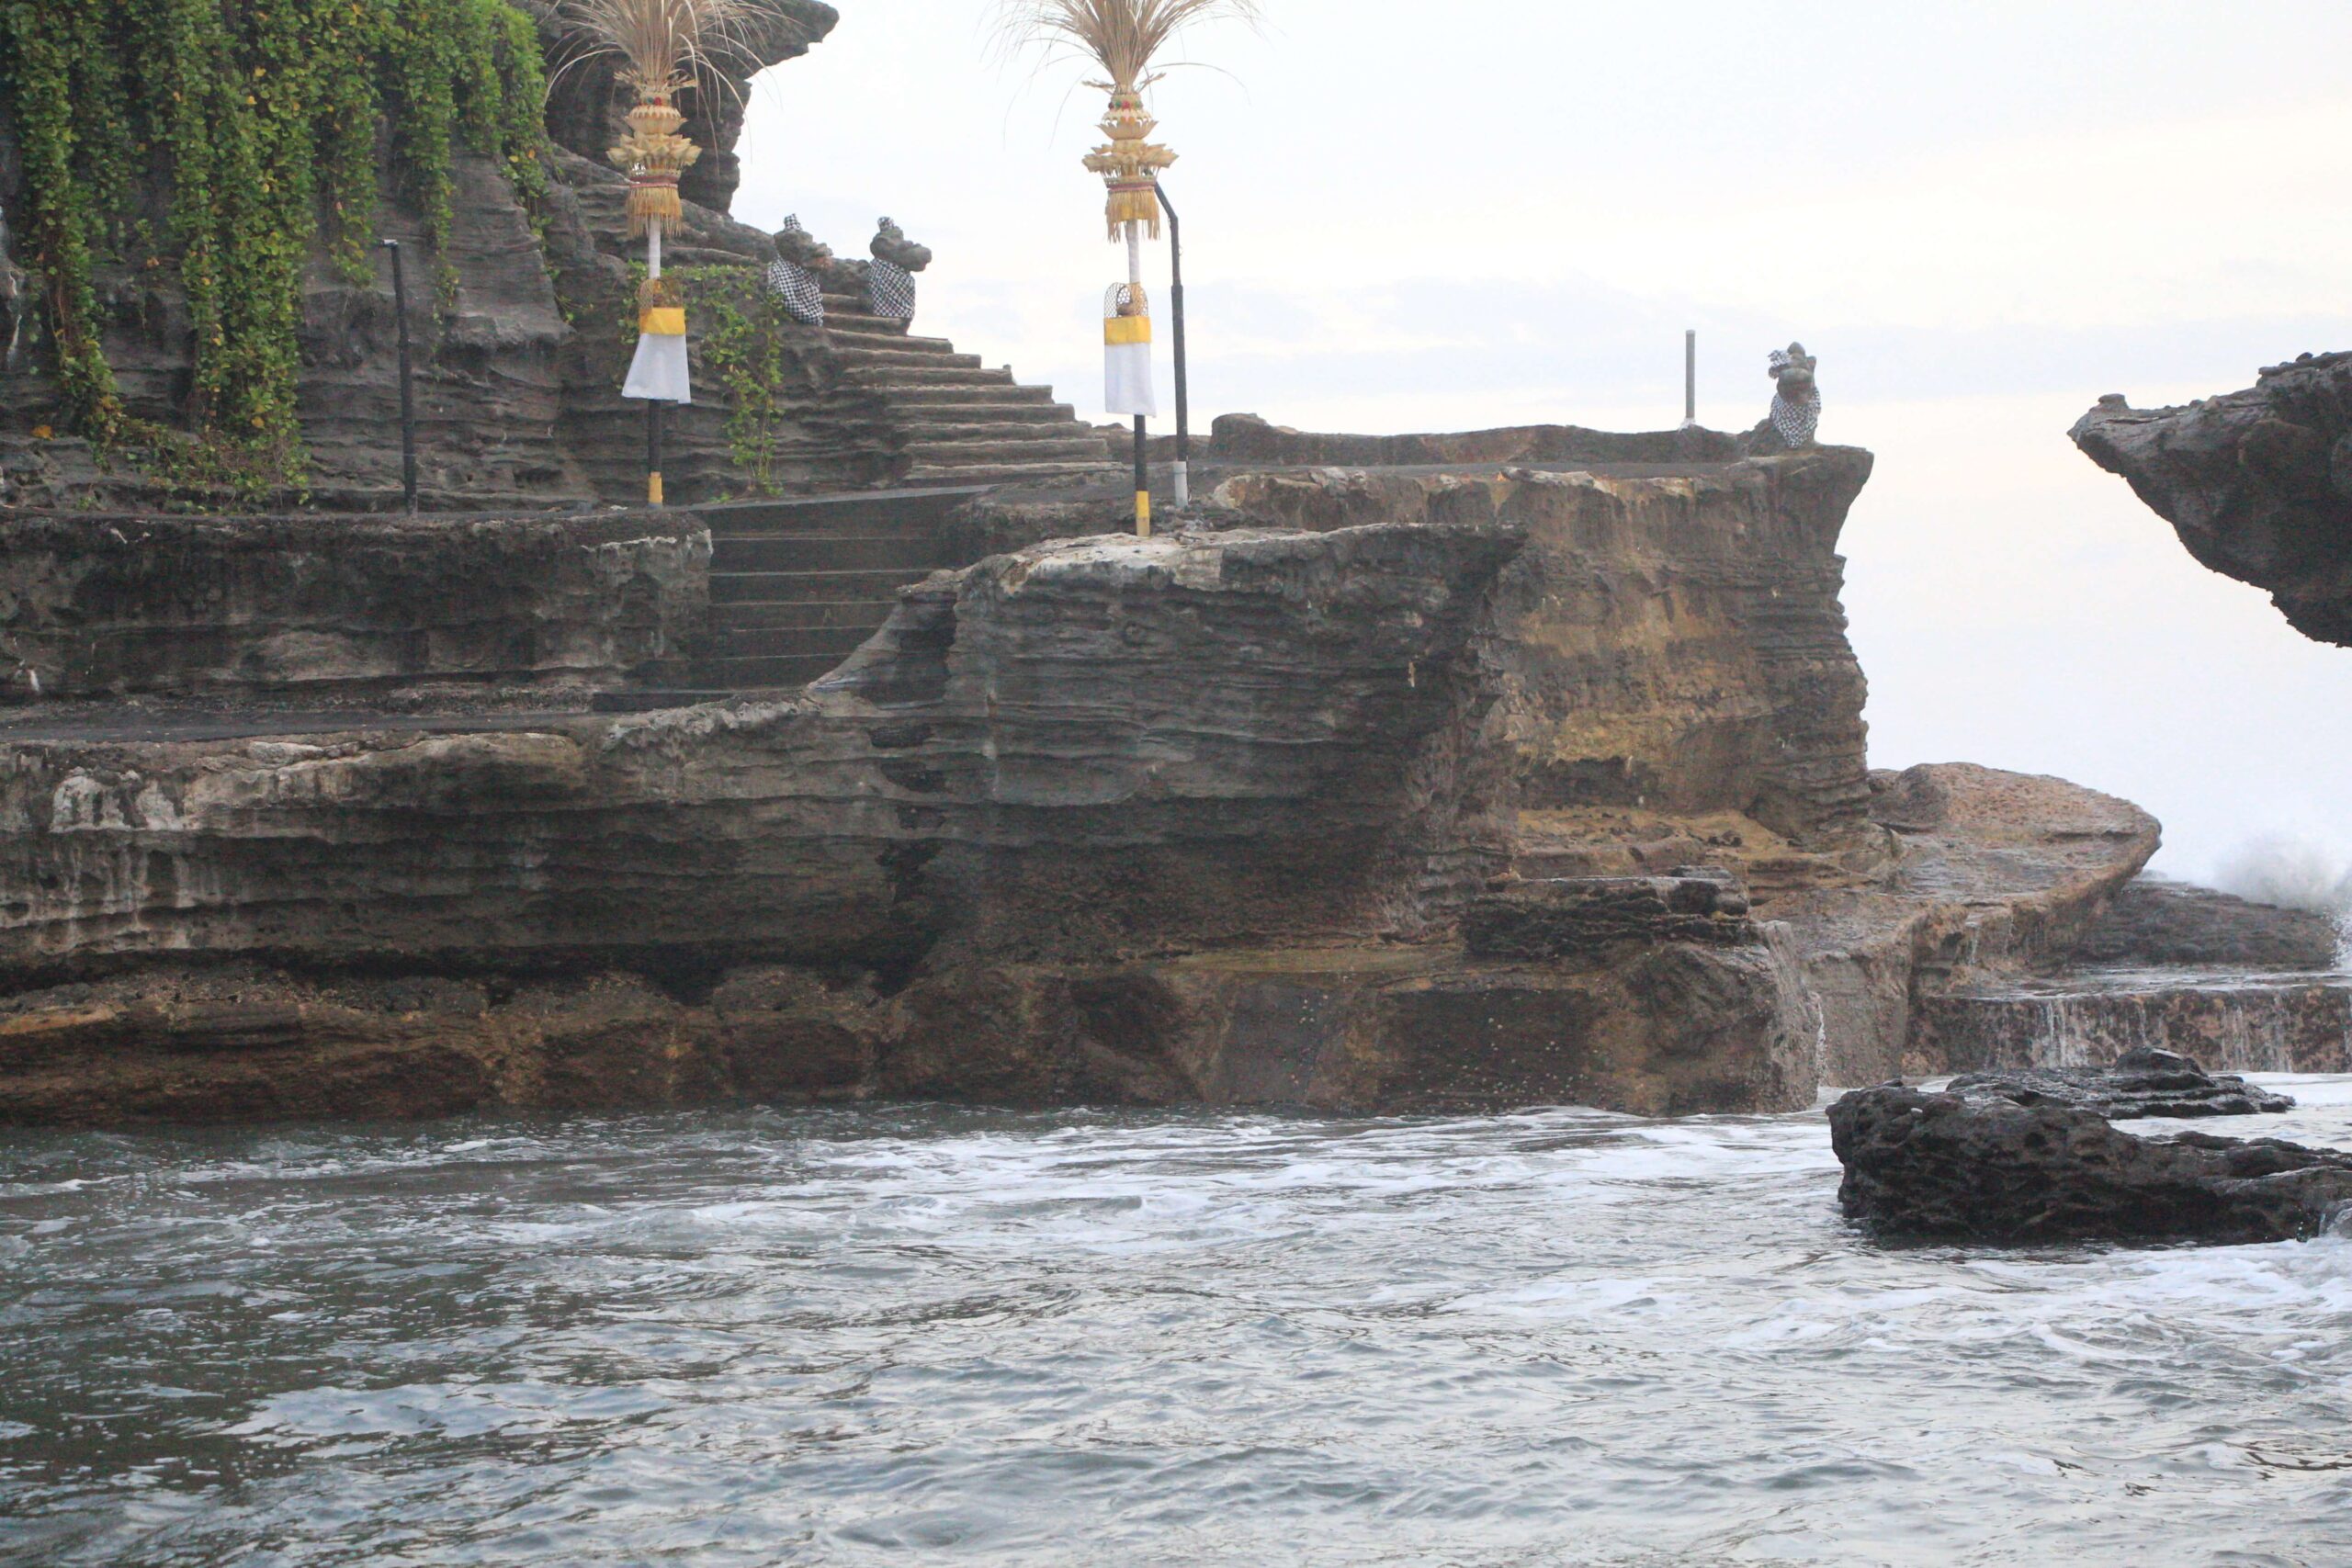 Bali breakup curse. This is an image of the stairs leading to the Tanah Lot temple. This was taken just before sunset during high tide.